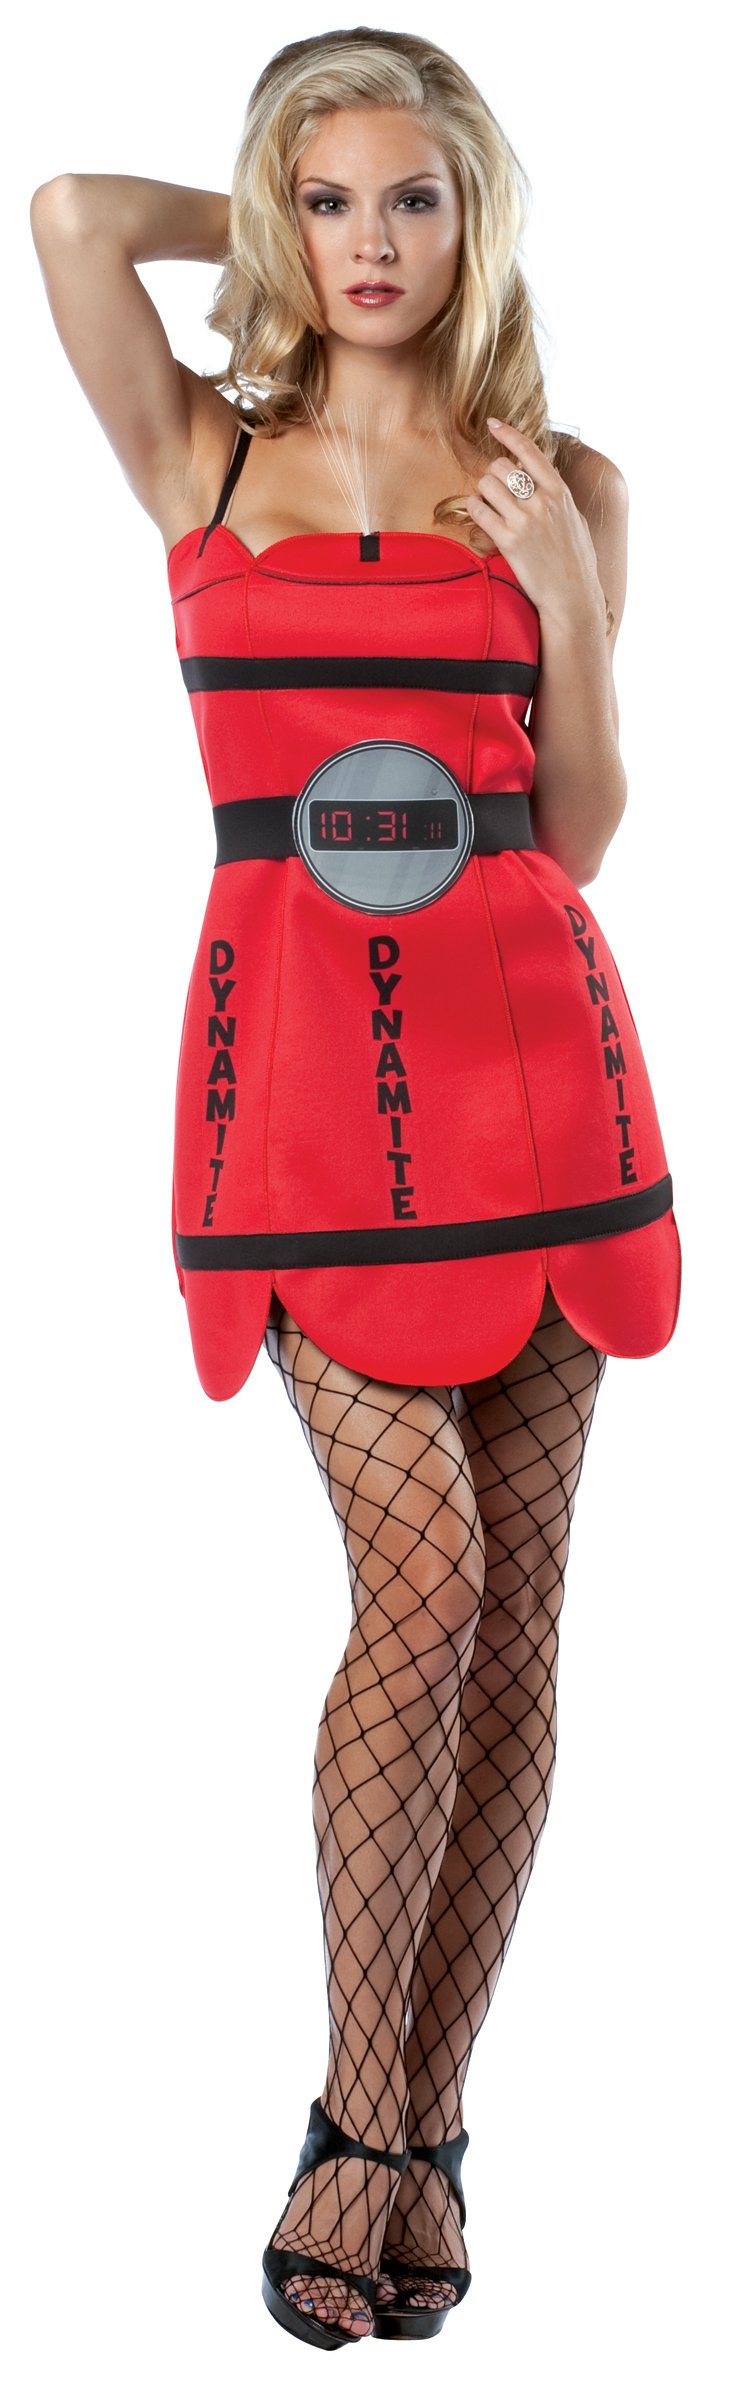 She's Dynamite Adult Costume